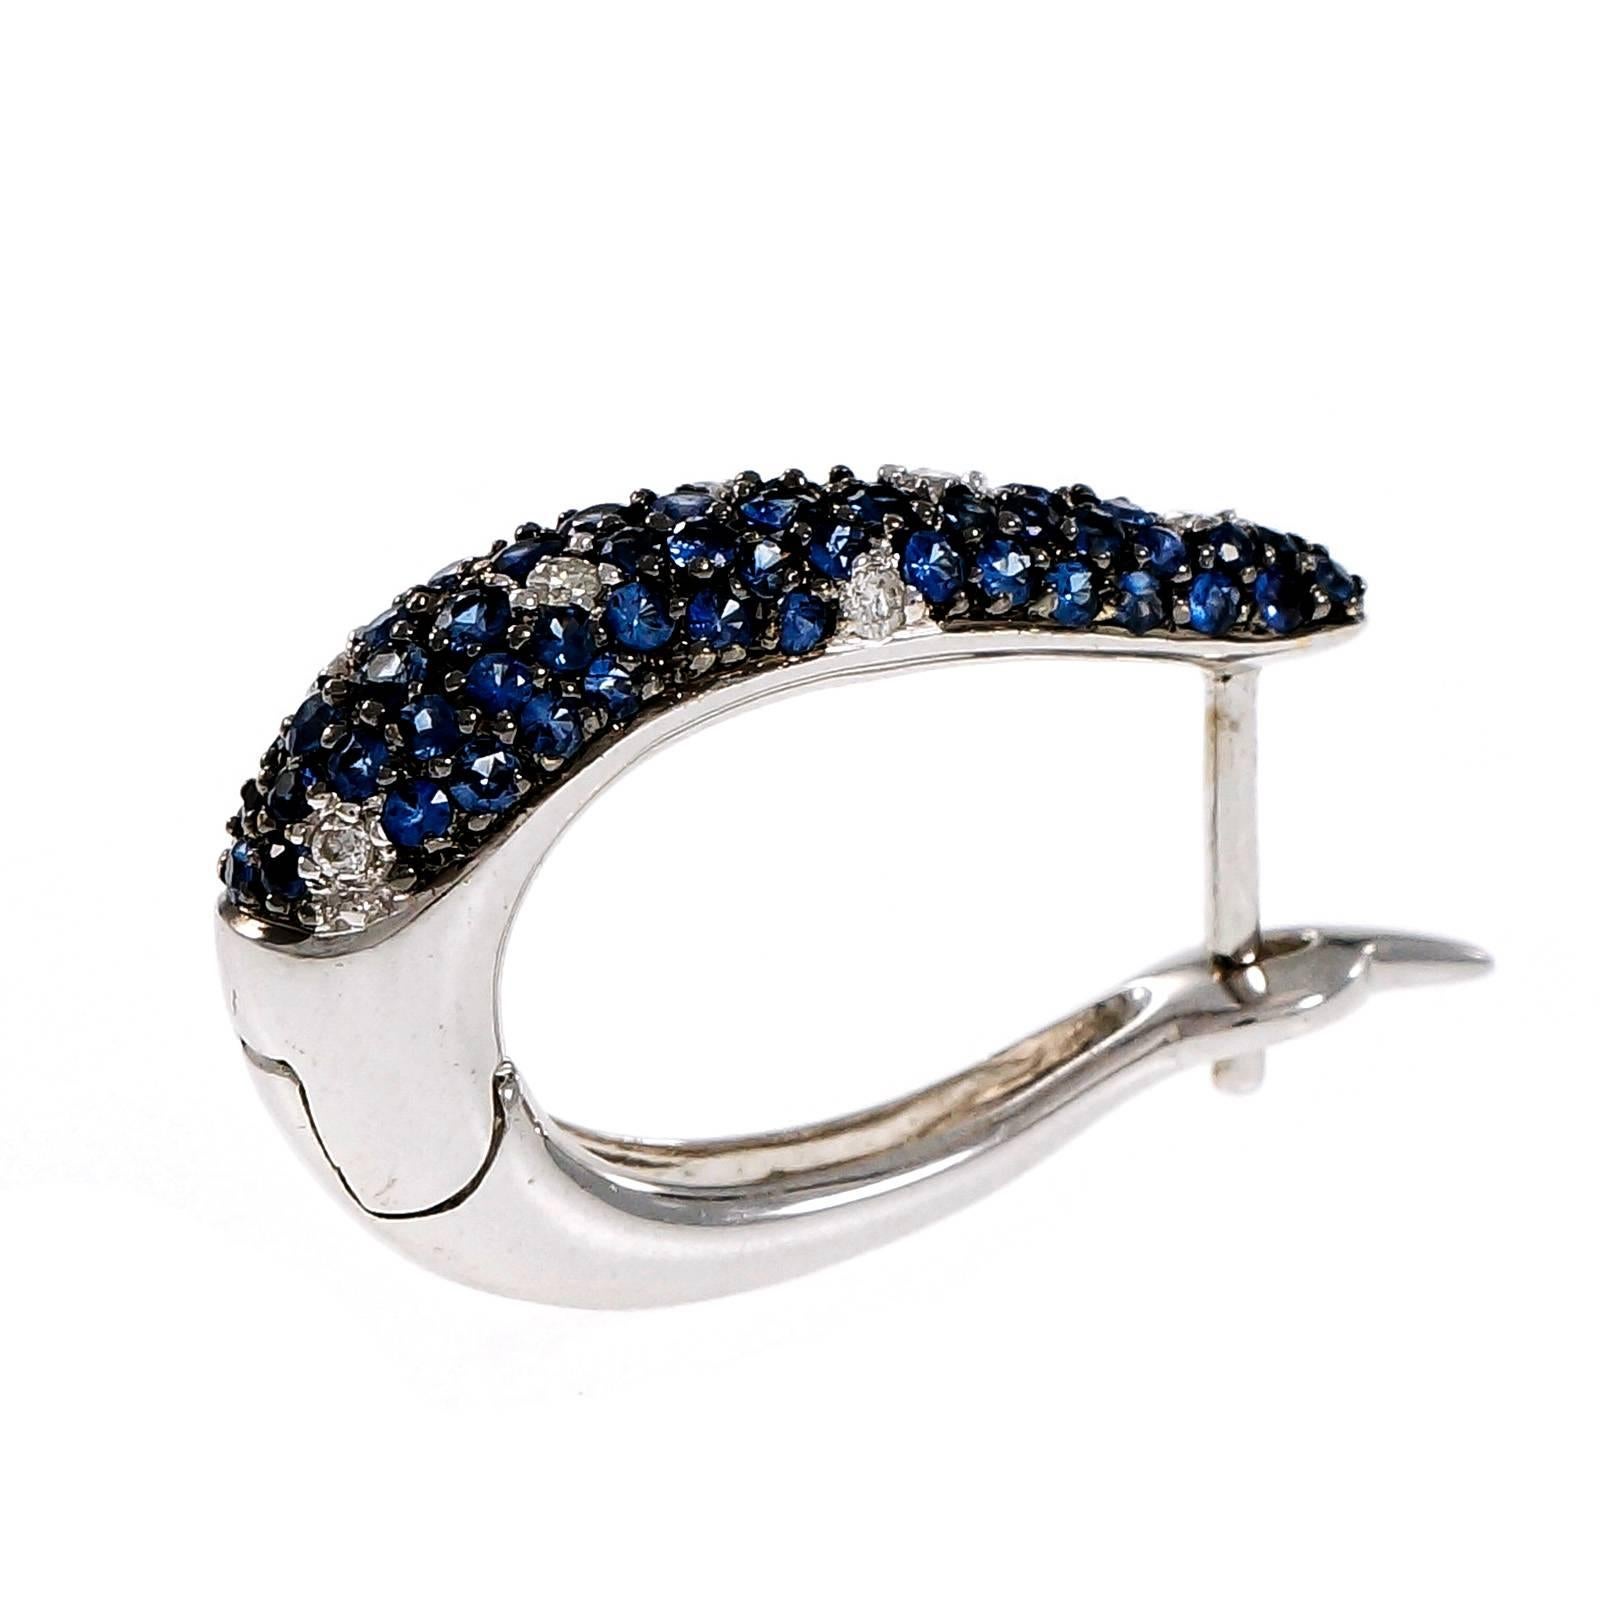 Beautiful hoop earrings set with bright blue Sapphires accented by white diamonds. Hinged backs. All 18k white gold. Post tops.

112 round blue Sapphires, approx. total weight 2.75cts
14 round diamonds, approx. total weight .20cts, H, VS –